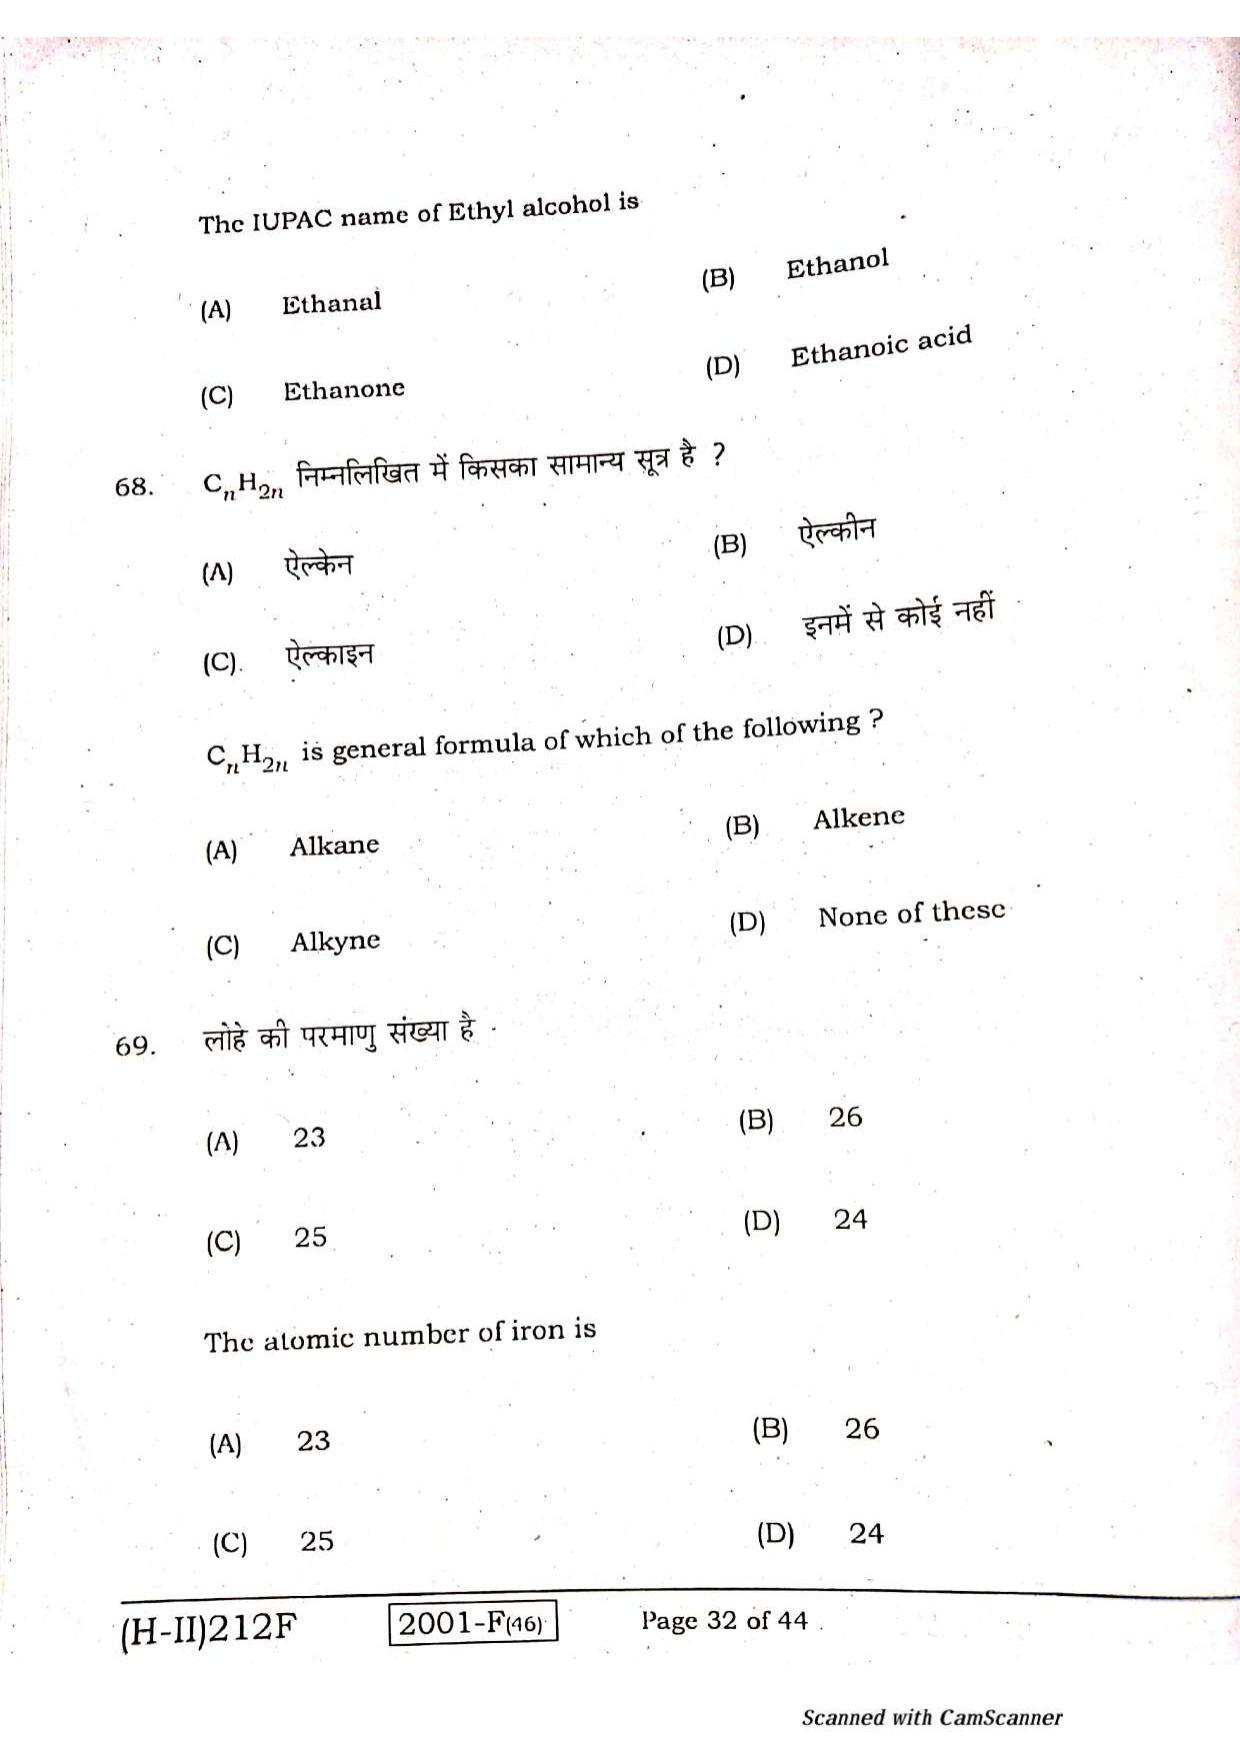 Bihar Board Class 10 Science 2021 (2nd Sitting) Question Paper - Page 30